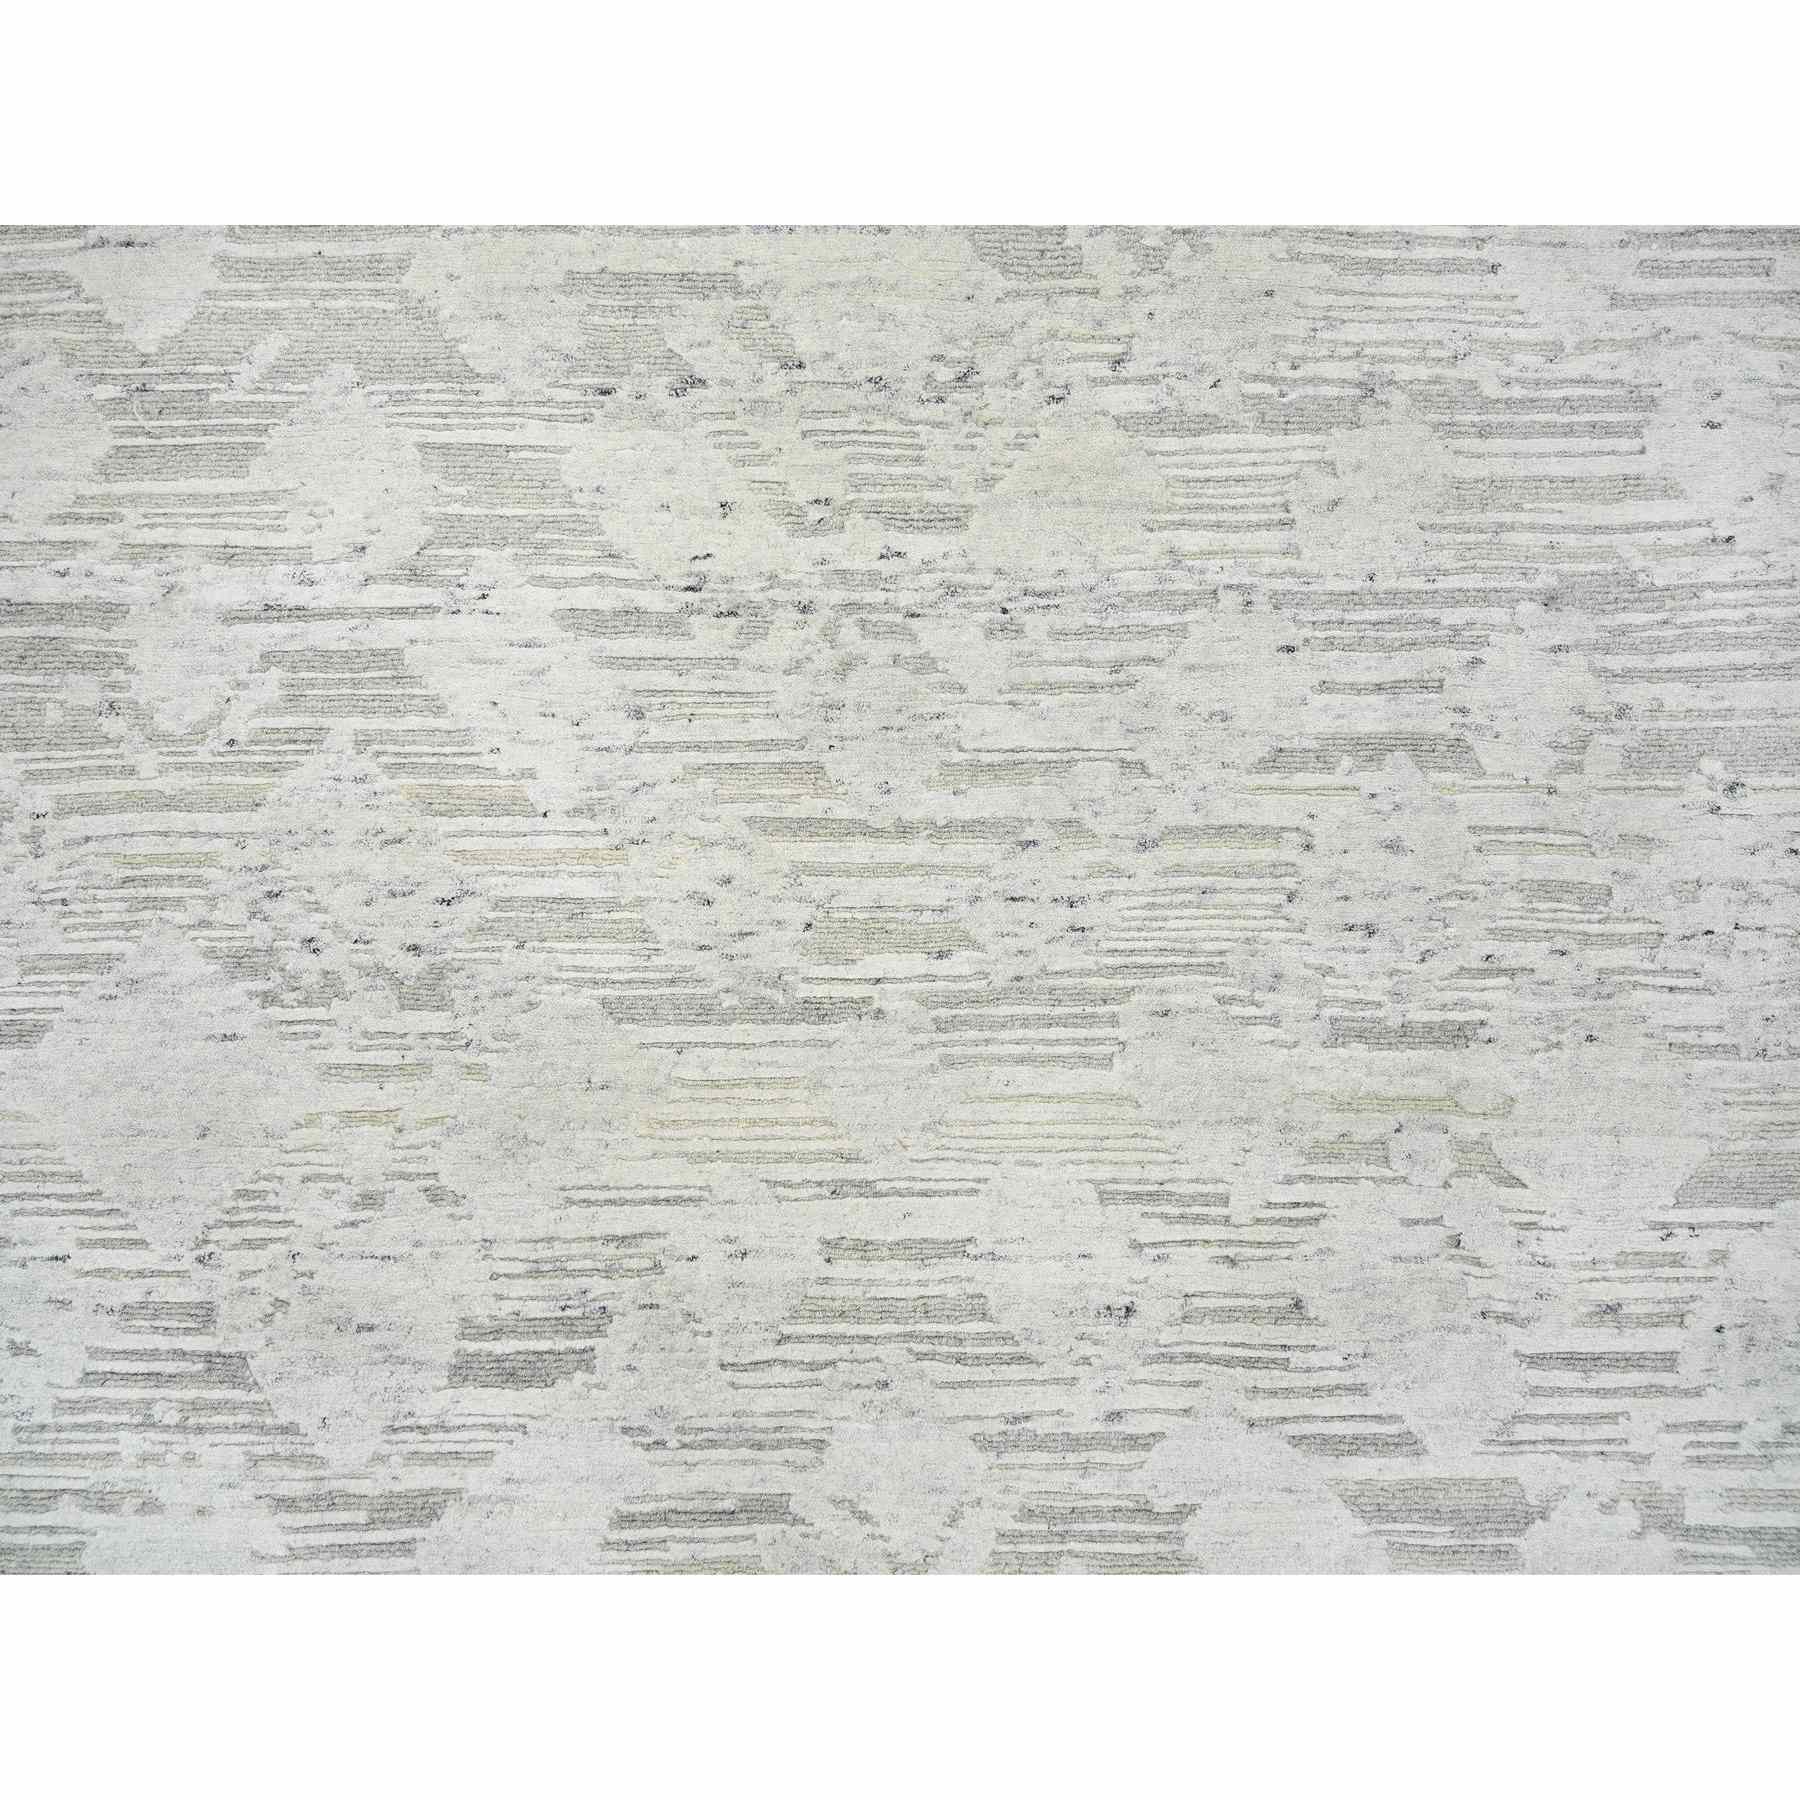 Modern-and-Contemporary-Hand-Knotted-Rug-323565